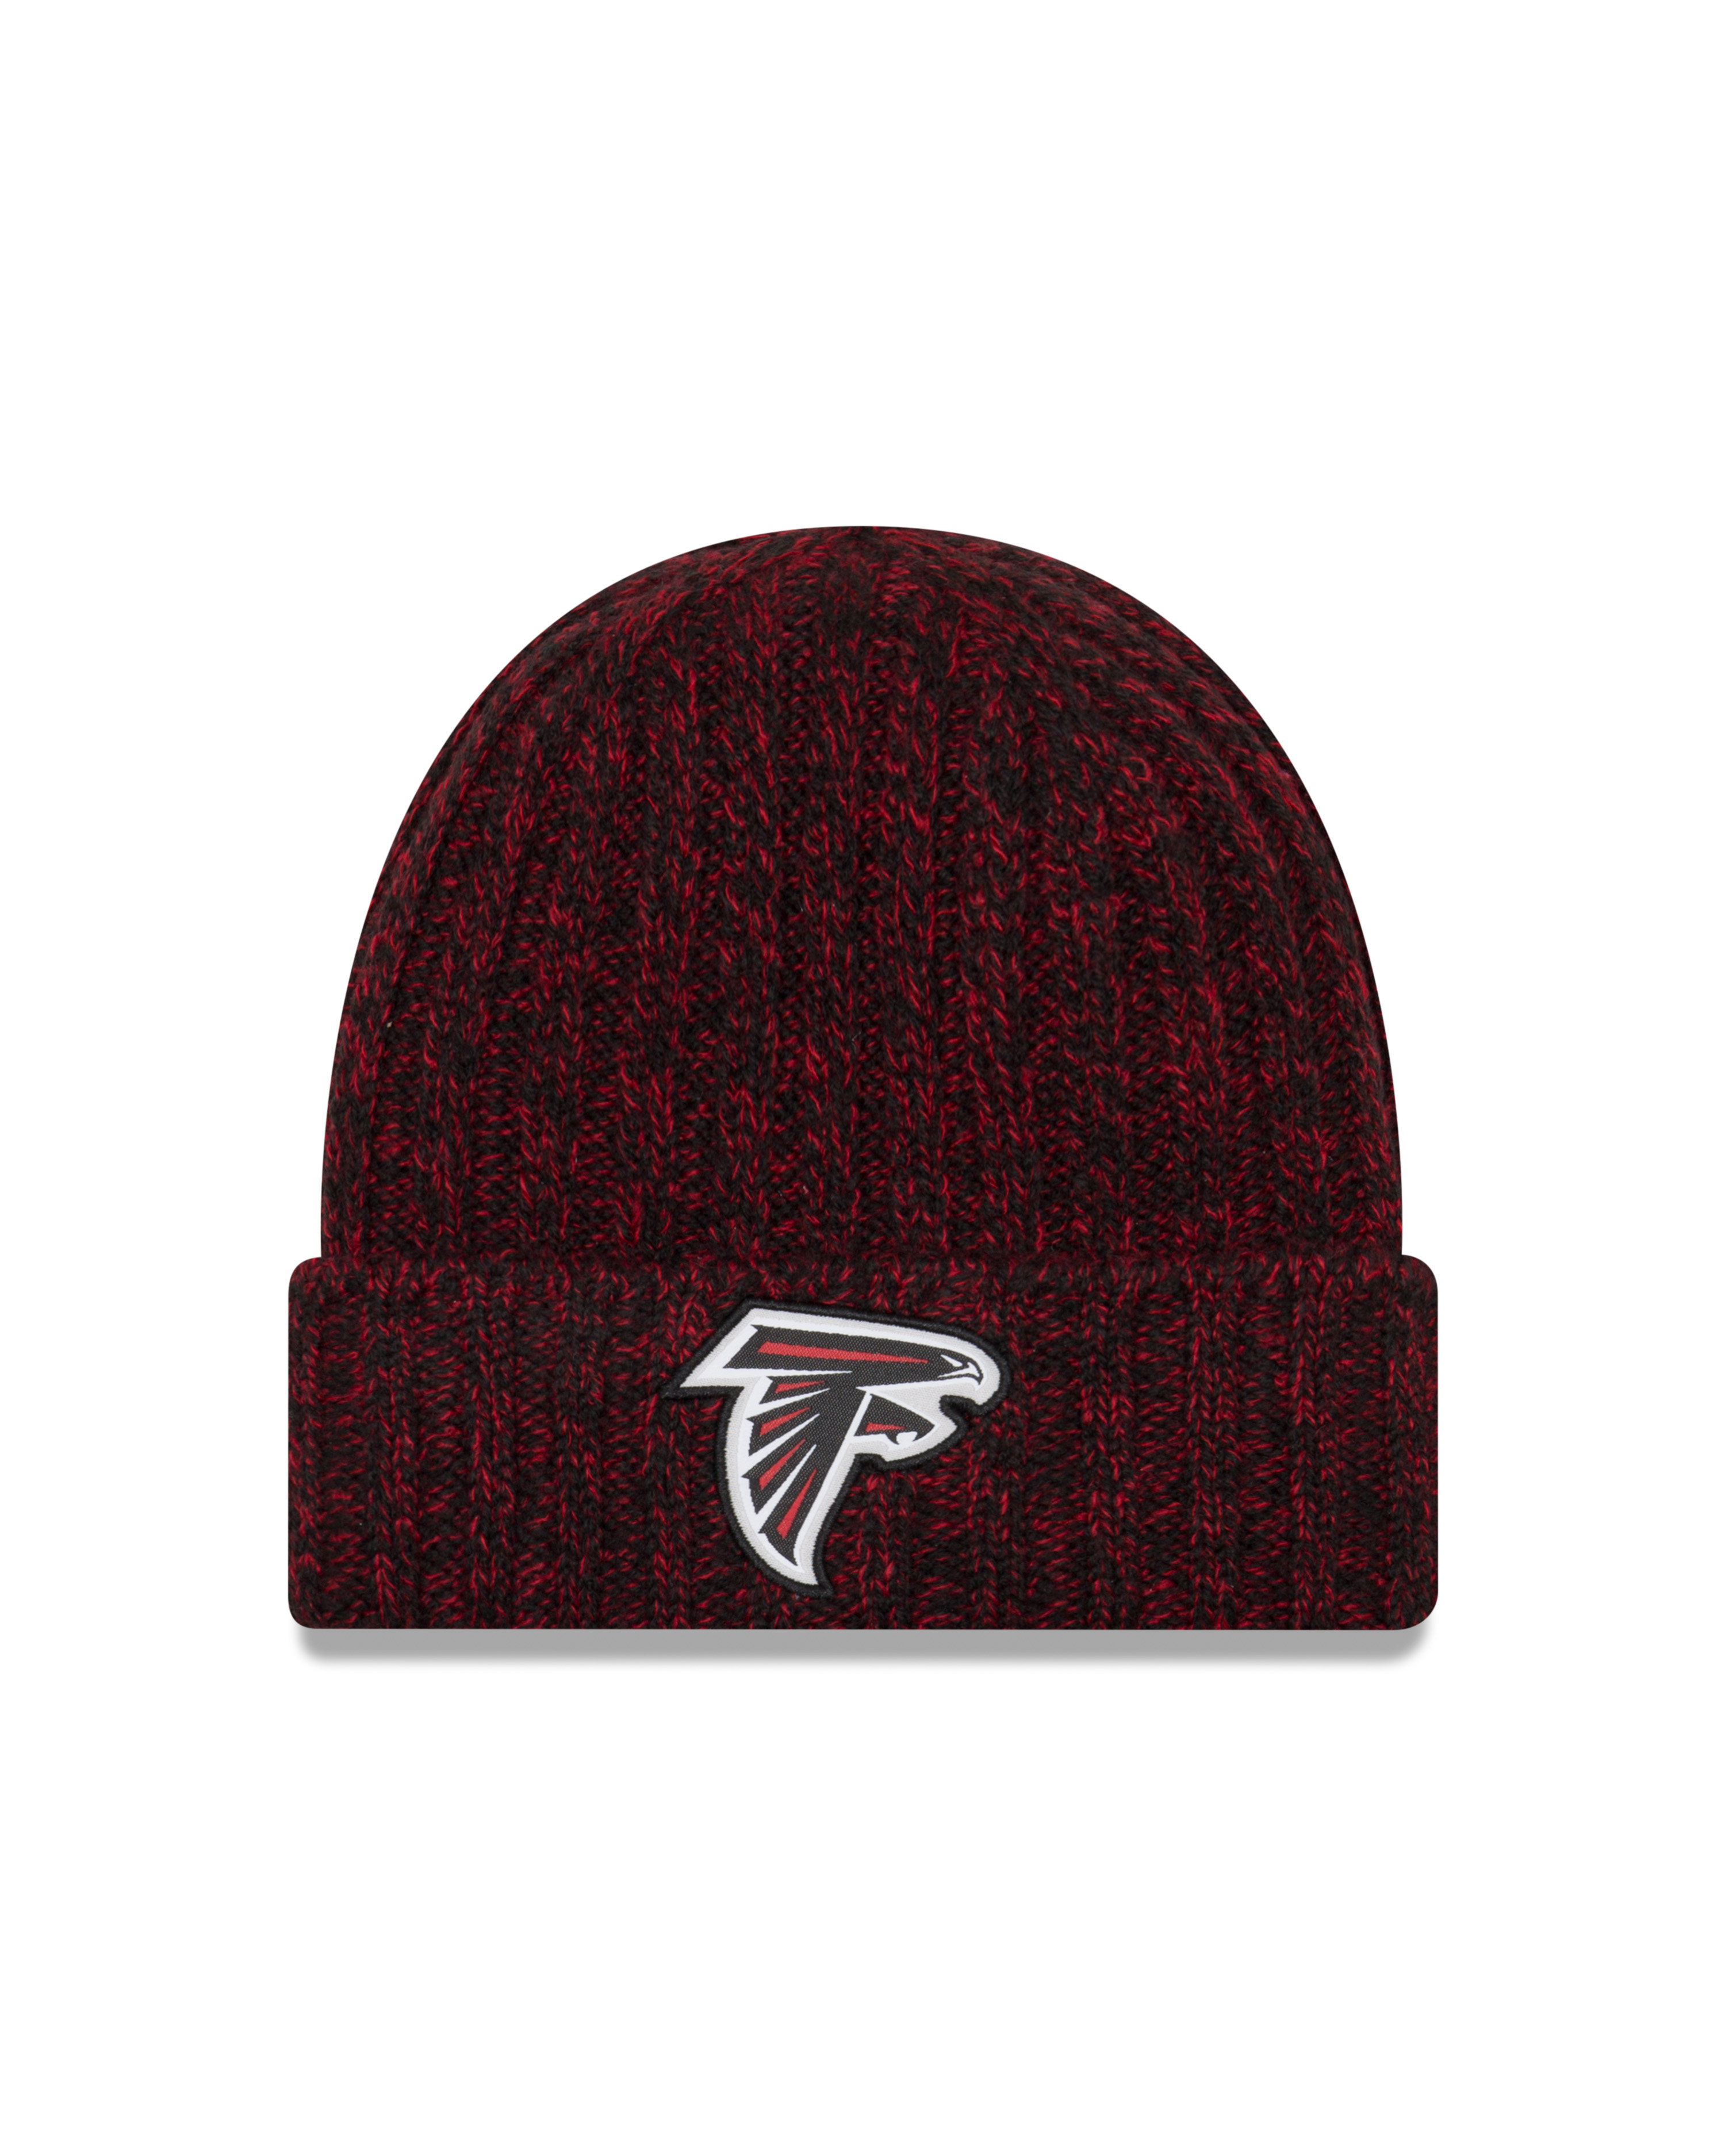 New Era Official NFL Cold Weather Collection #93